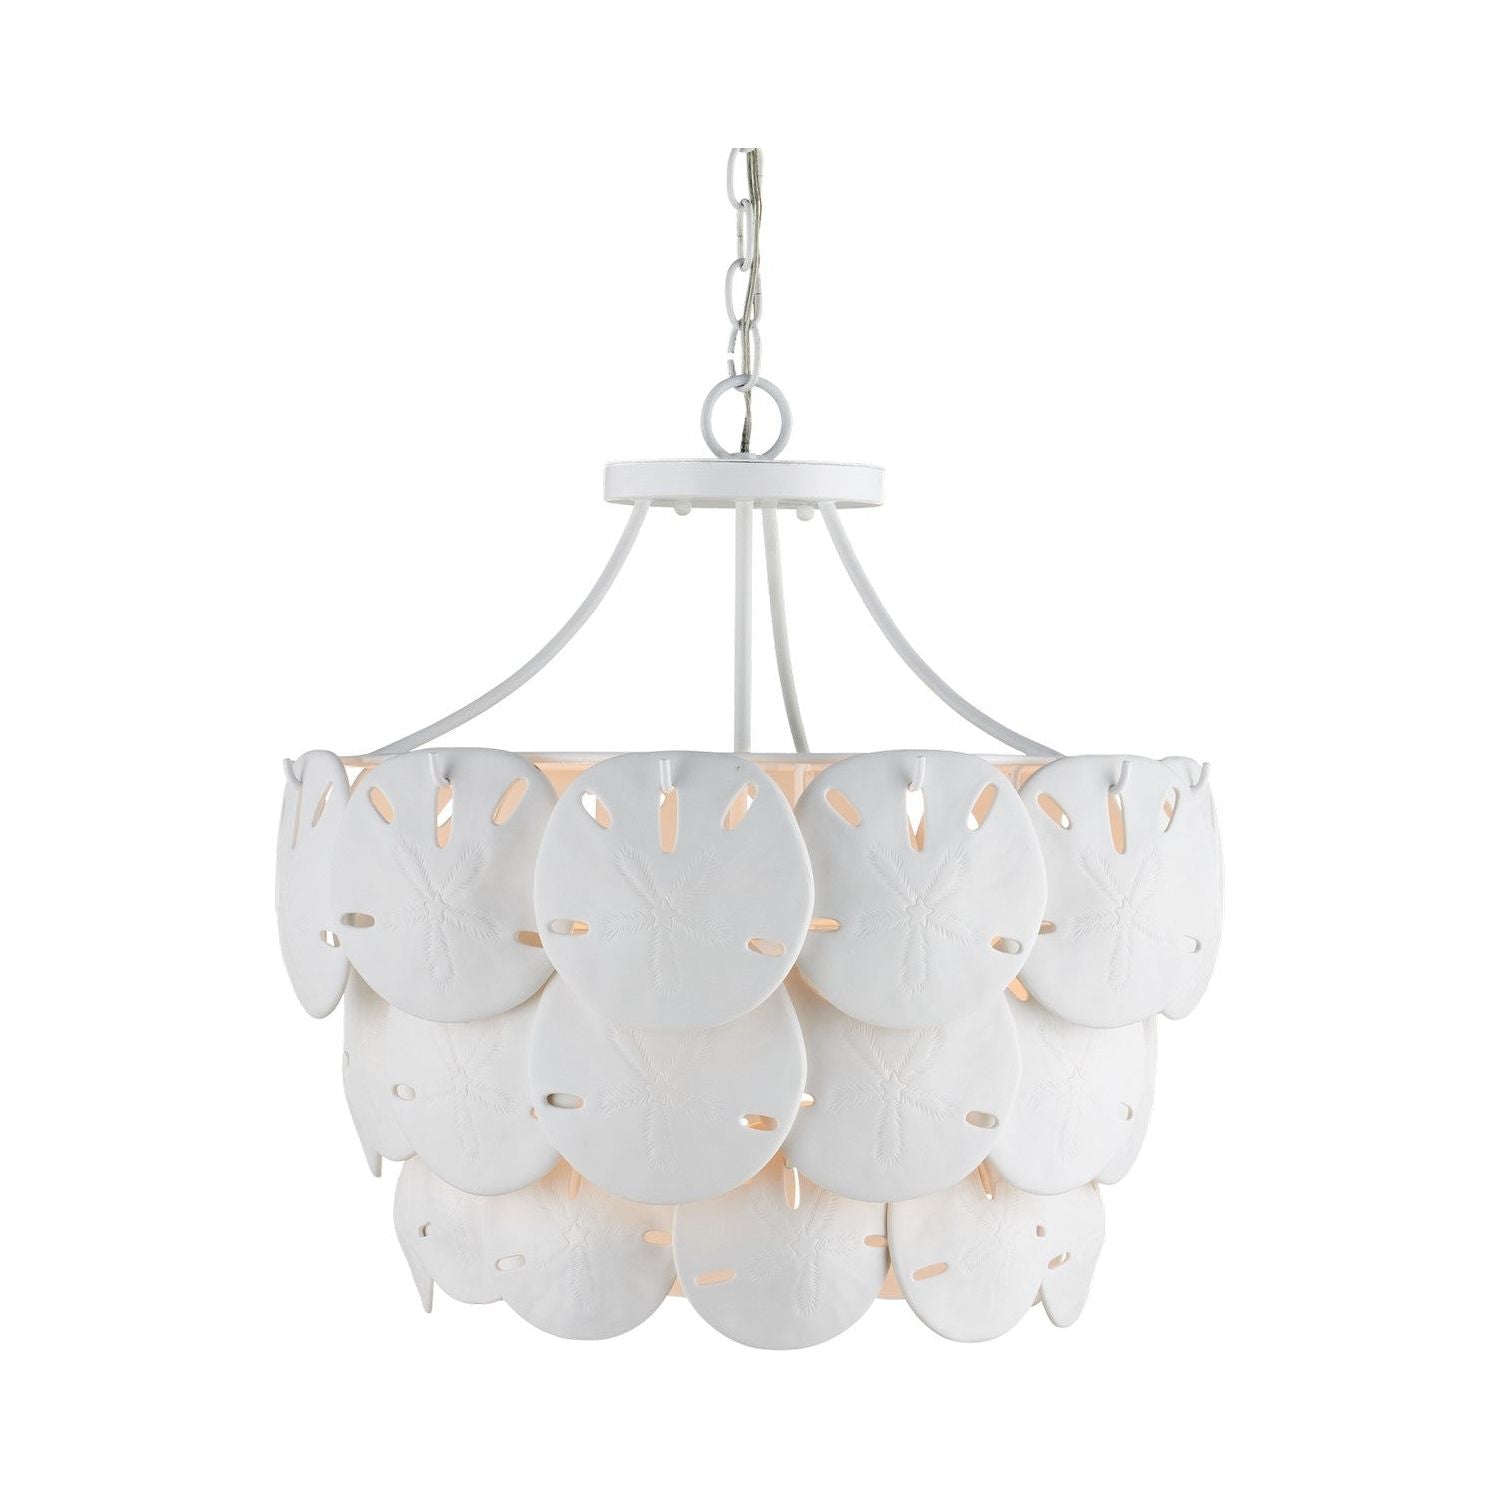 Currey and Company - 9000-1202 - Three Light Chandelier - Sugar White/White